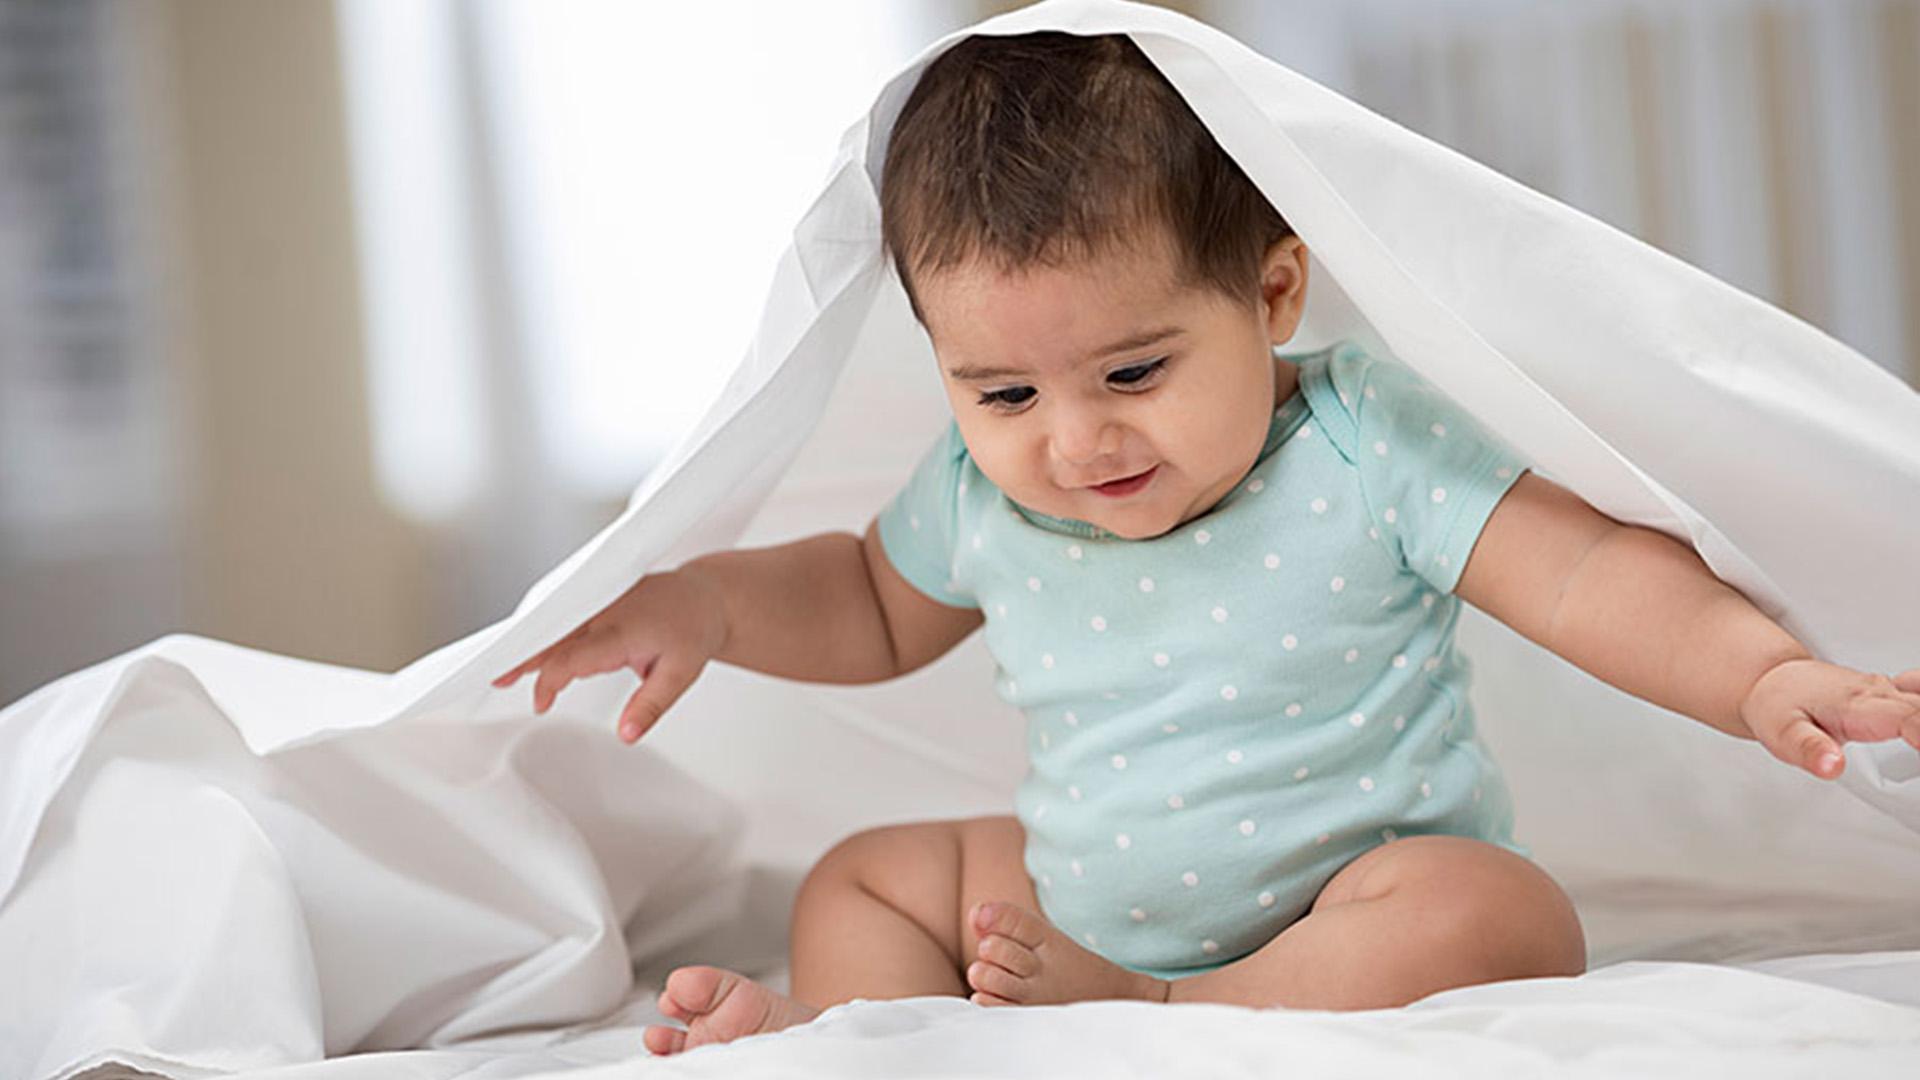 The 6 Types of Diaper Rash and Their Causes - GoodRx